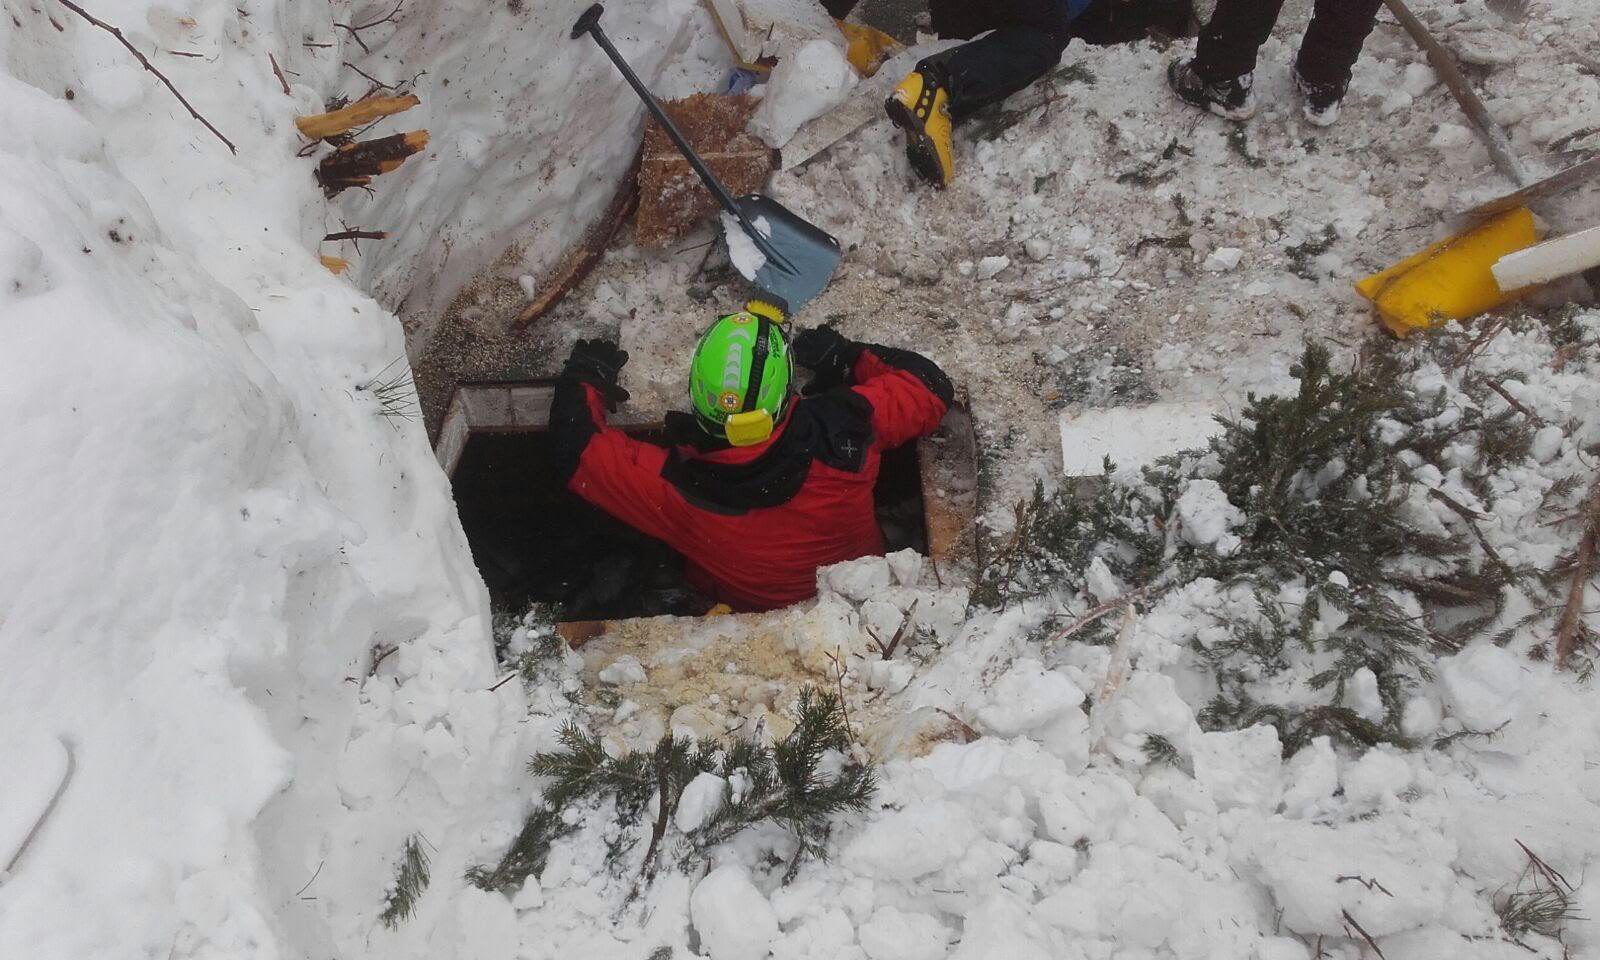 epa05740799 A handout photo made available by the Italian Mountain Rescue Service 'Soccorso Alpino' shows Soccorso Alpino volunteers and rescuers at work in the area of the hotel Rigopiano in Farindola, Abruzzo region, Italy, 22 January 2017. Four days after the 18 January huge avalanche that swept away the hotel Rigopiano, search crews are intensifying their round-the-clock operation, fighting against the clock and deteriorating weather conditions including fresh snowfall and freezing temperatures. Five people were killed in the disaster, 11 survived, while 23 are still missing.  EPA/SOCCORSO ALPINO HANDOUT  HANDOUT EDITORIAL USE ONLY/NO SALES ITALY EARTHQUAKE AVALANCHE